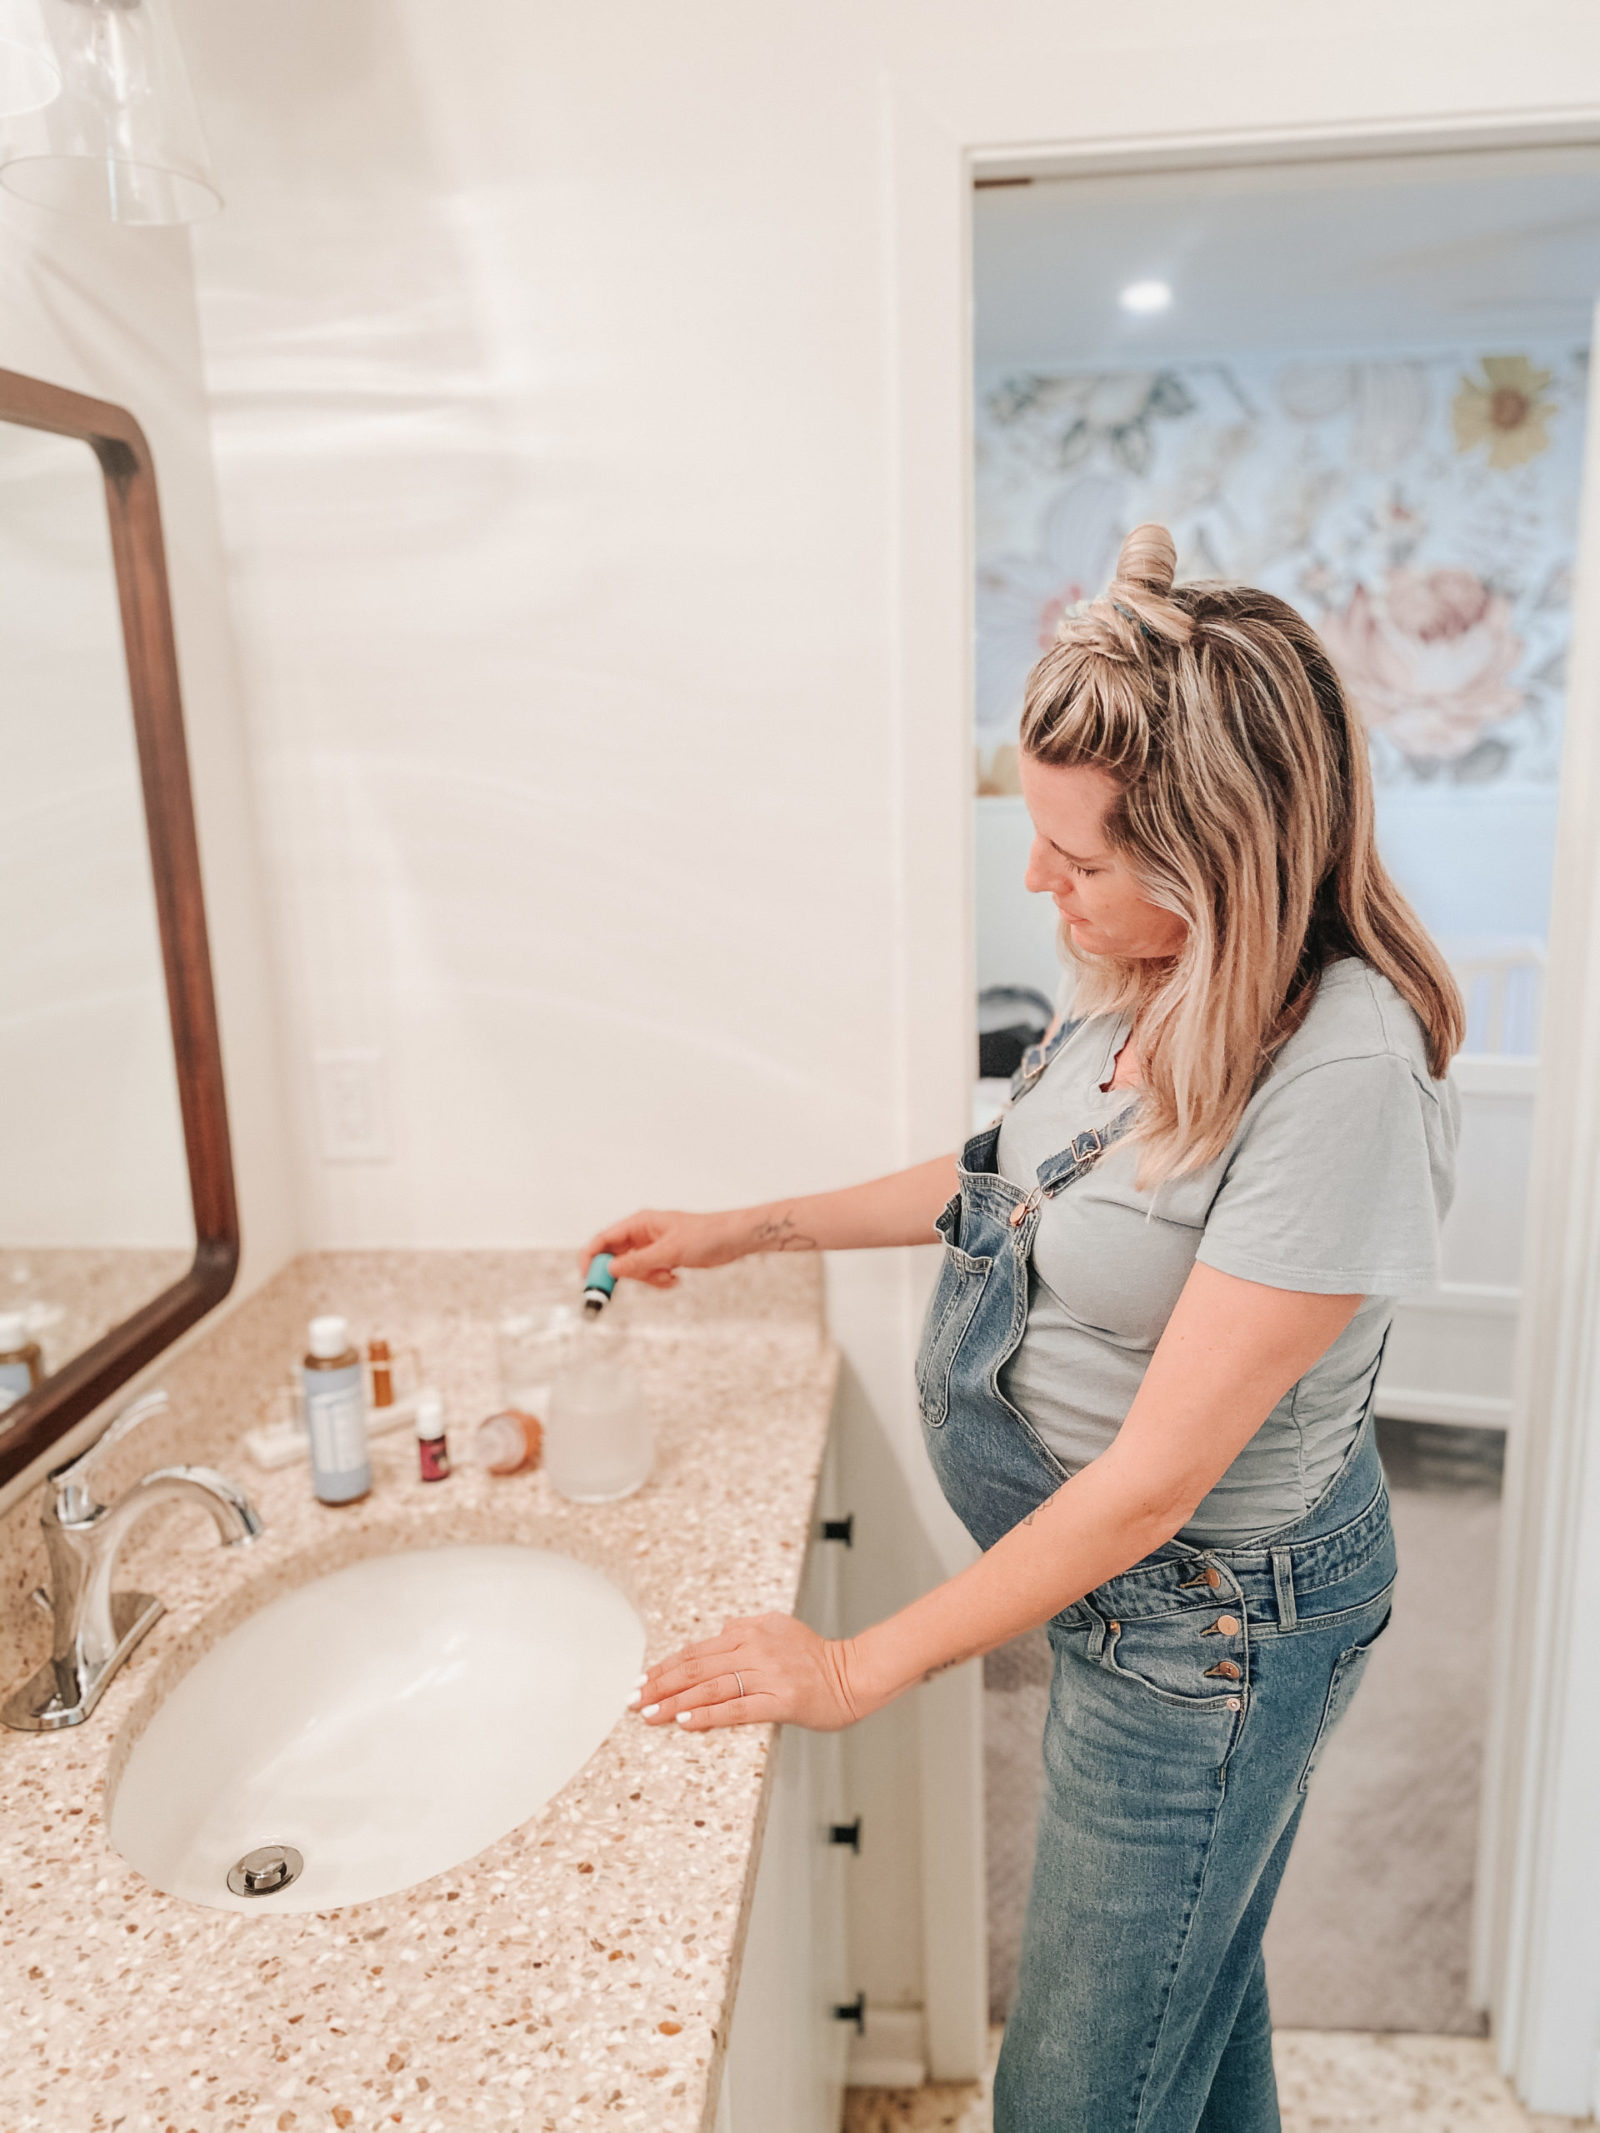 Wynne Elder fills a Whimsy + Wellness foaming hand soap dispenser with Young Living Essential oils.